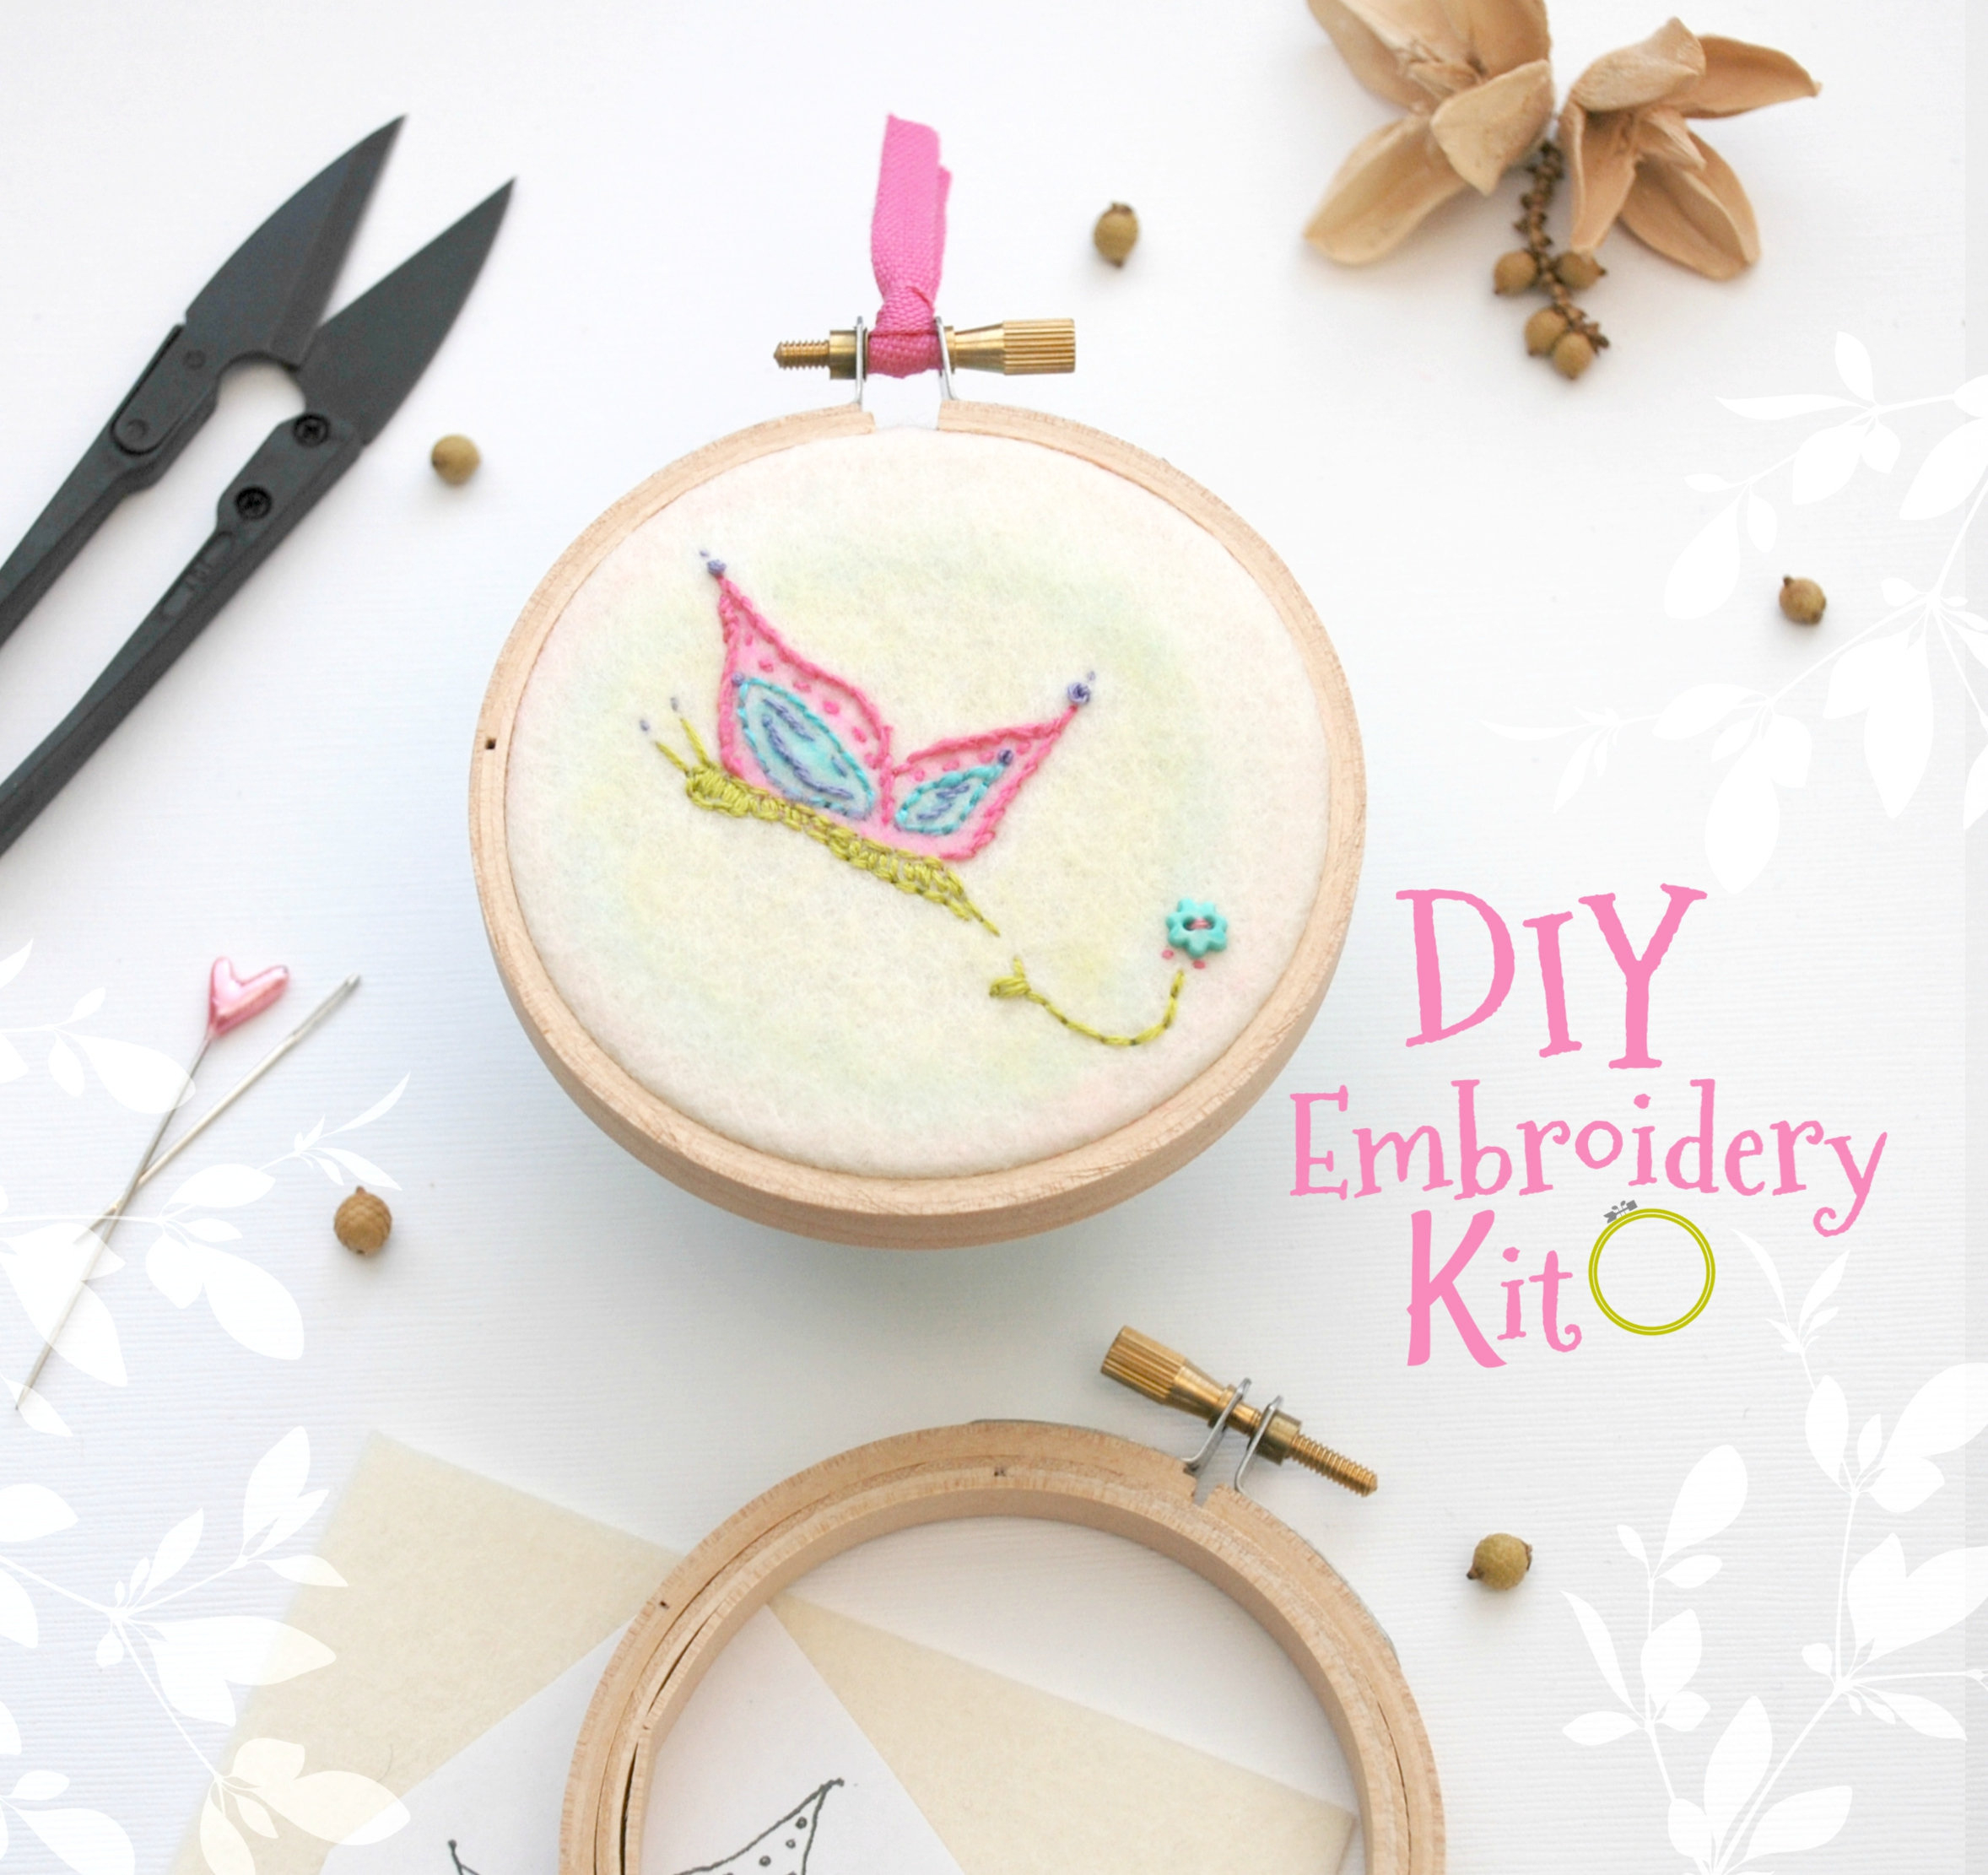 Diy Embroidery Patterns Butterfly Embroidery Patterns Diy Embroidery Kit Kids Cute Stitching Patterns Diy Beginners Stitching Kit Iron On Butterfly Diy